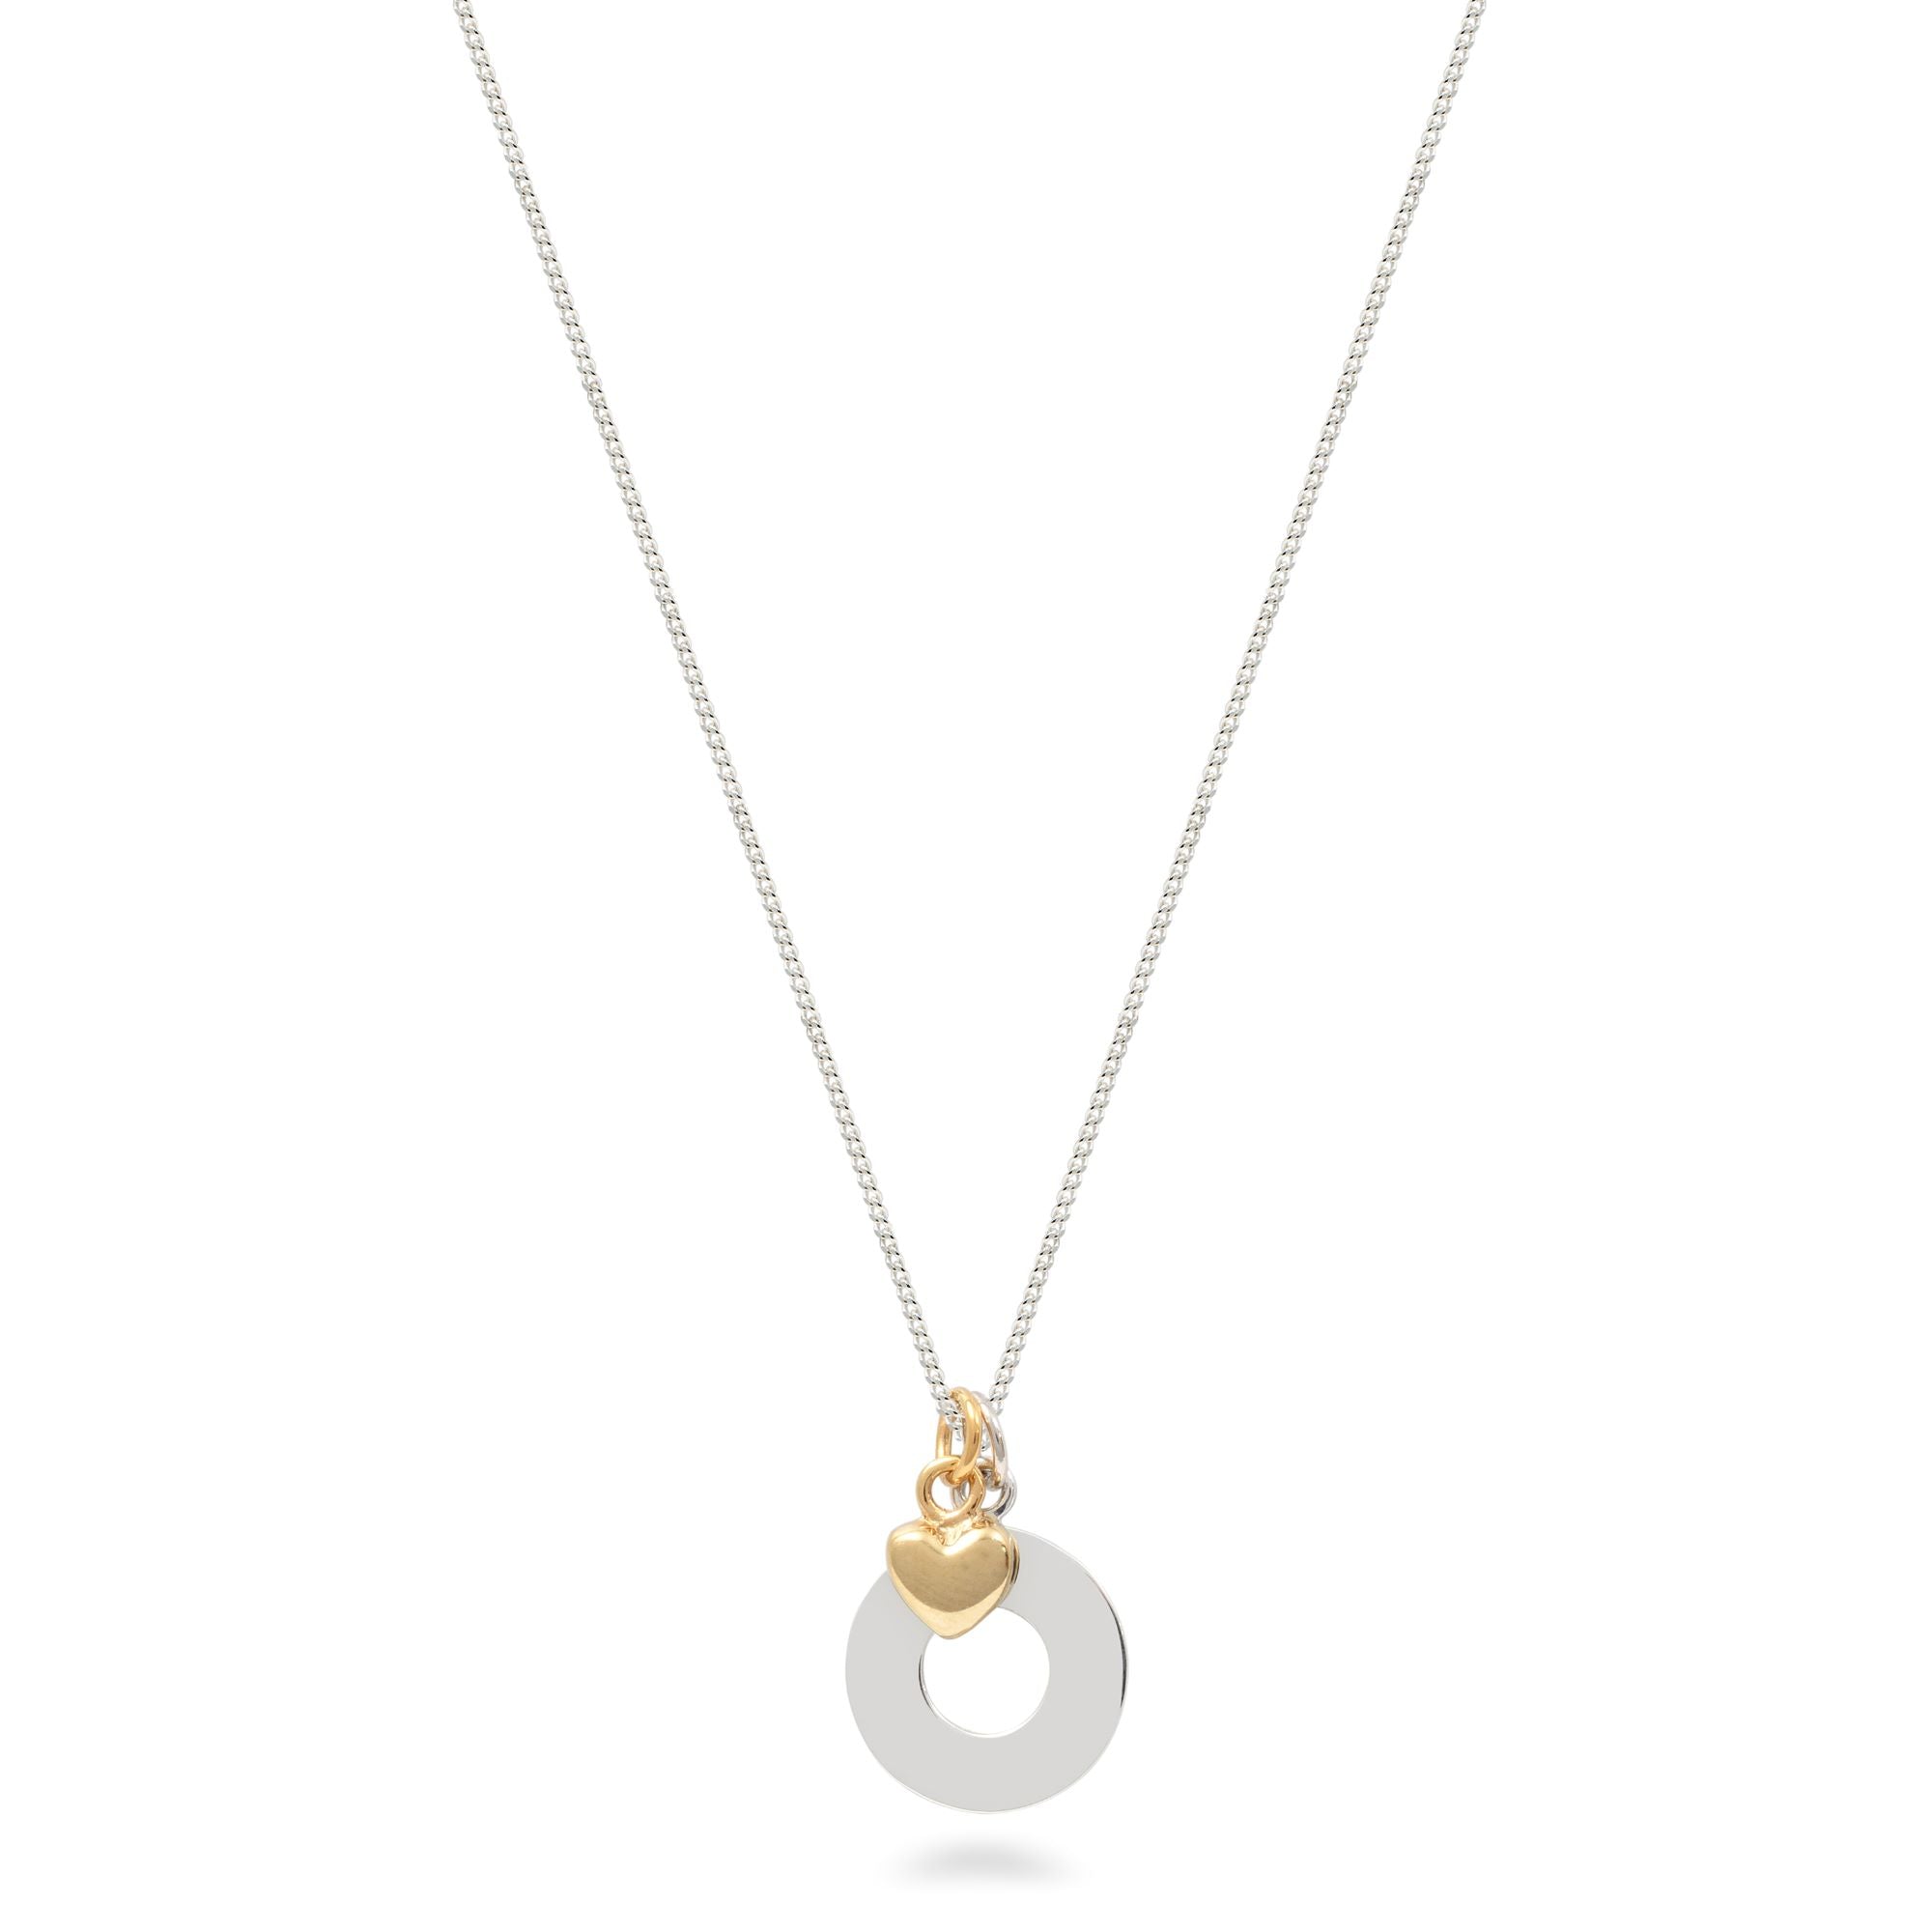 Circle and Heart Necklace Sterling Silver and Vermeil